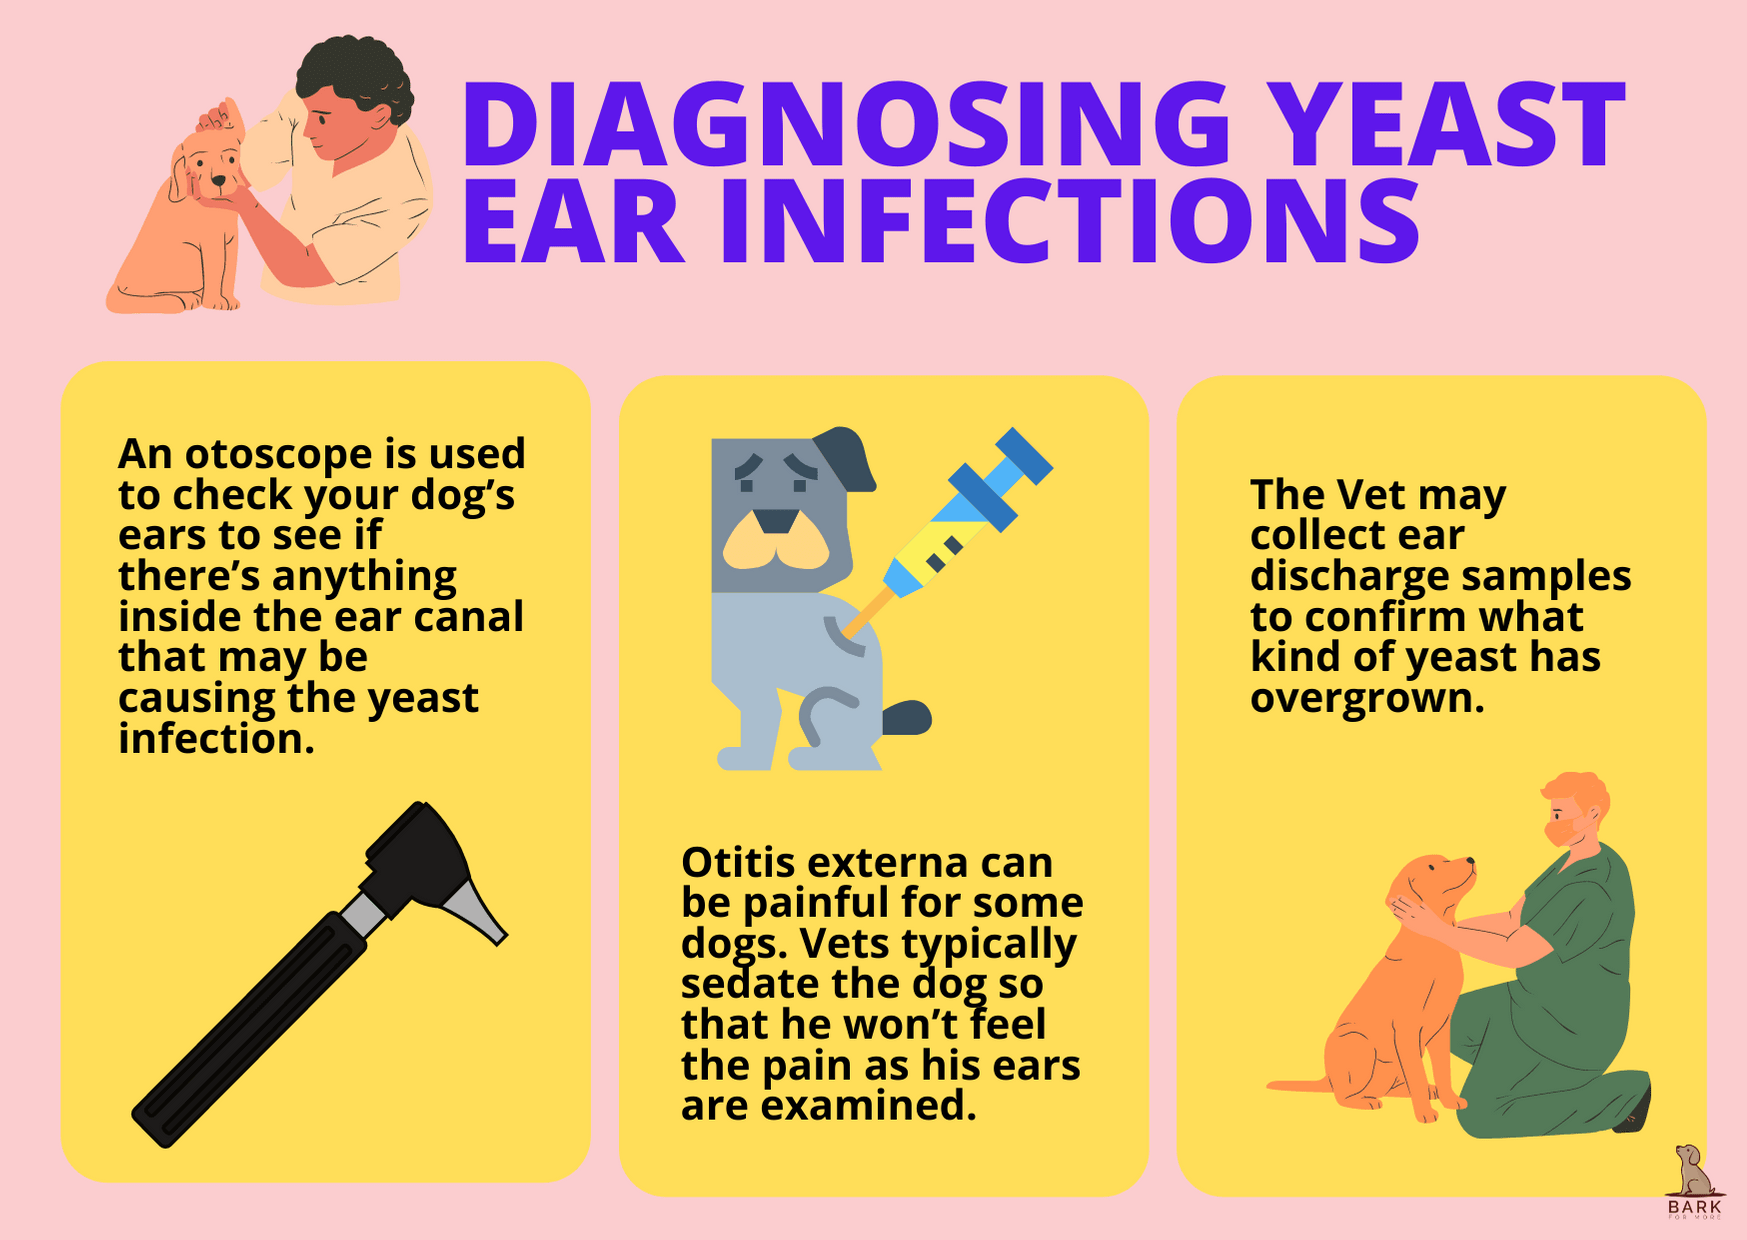 Diagnosing Yeast Ear Infections